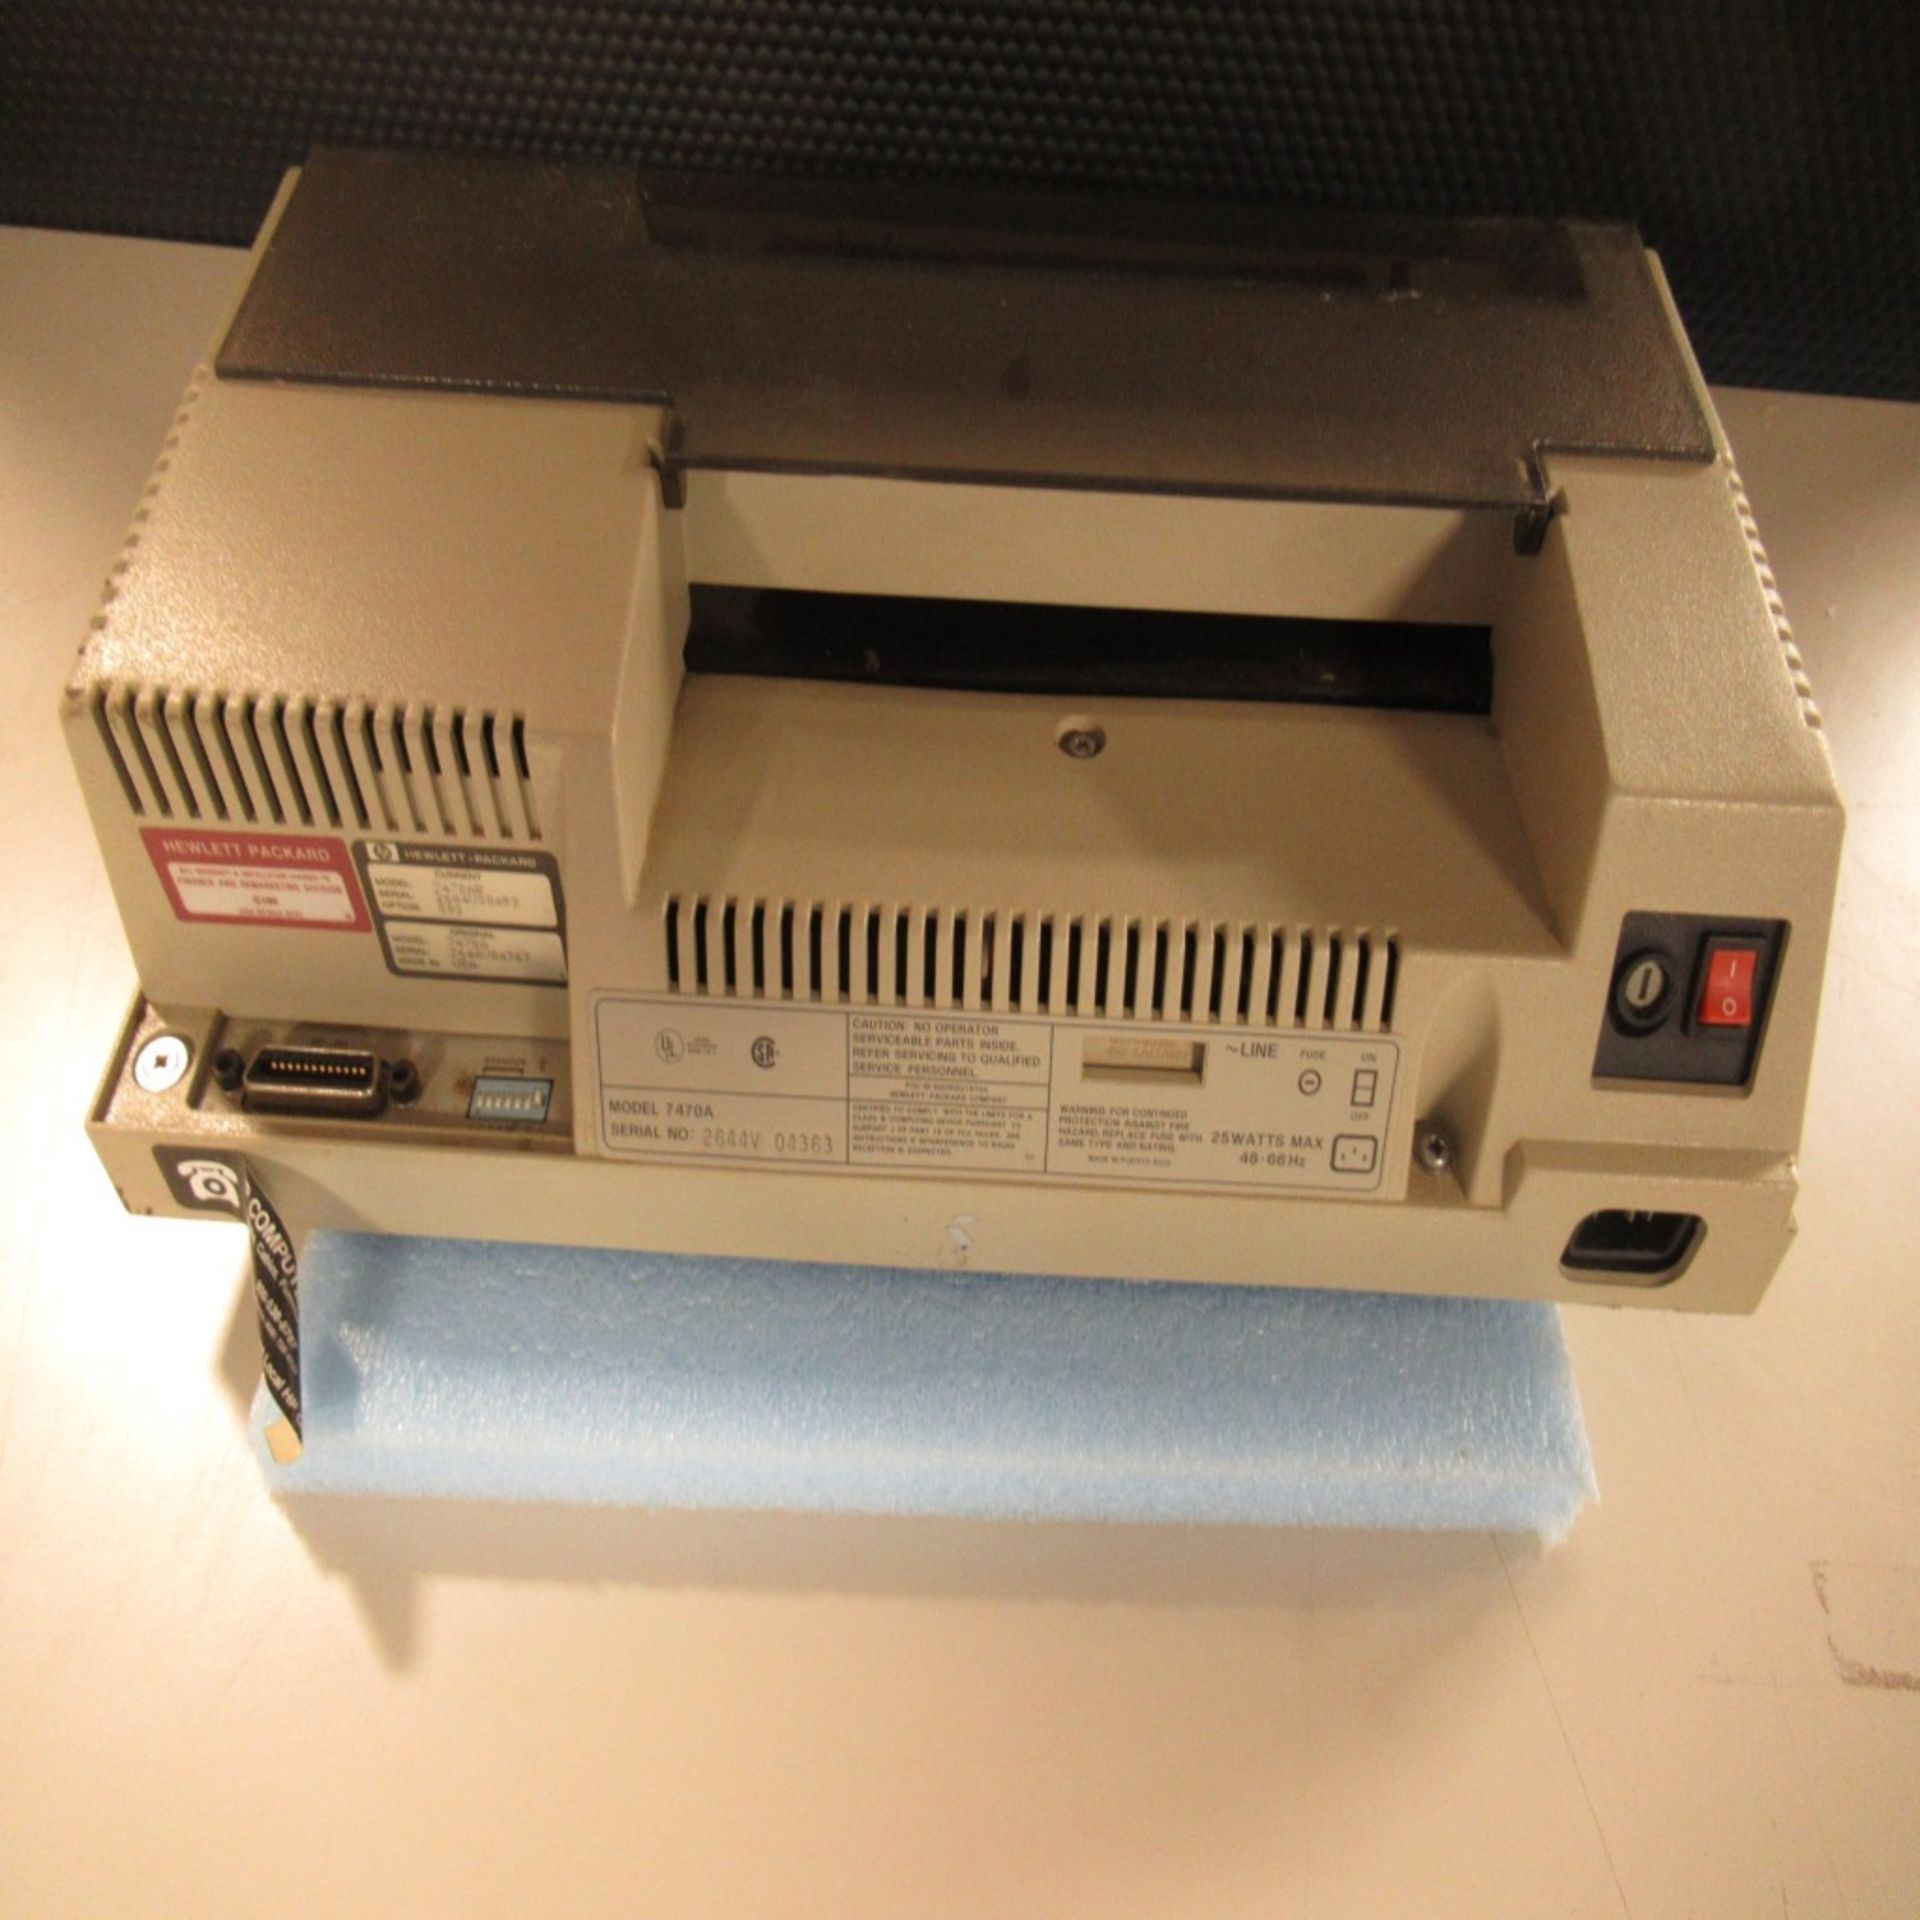 PHOTON SNAP SHOT MODEL 6000 *POWERS ON* NO SCREEN DISPLAY; FARNELL AP20-80 REGULATED POWER SUPPLY * - Image 154 of 222